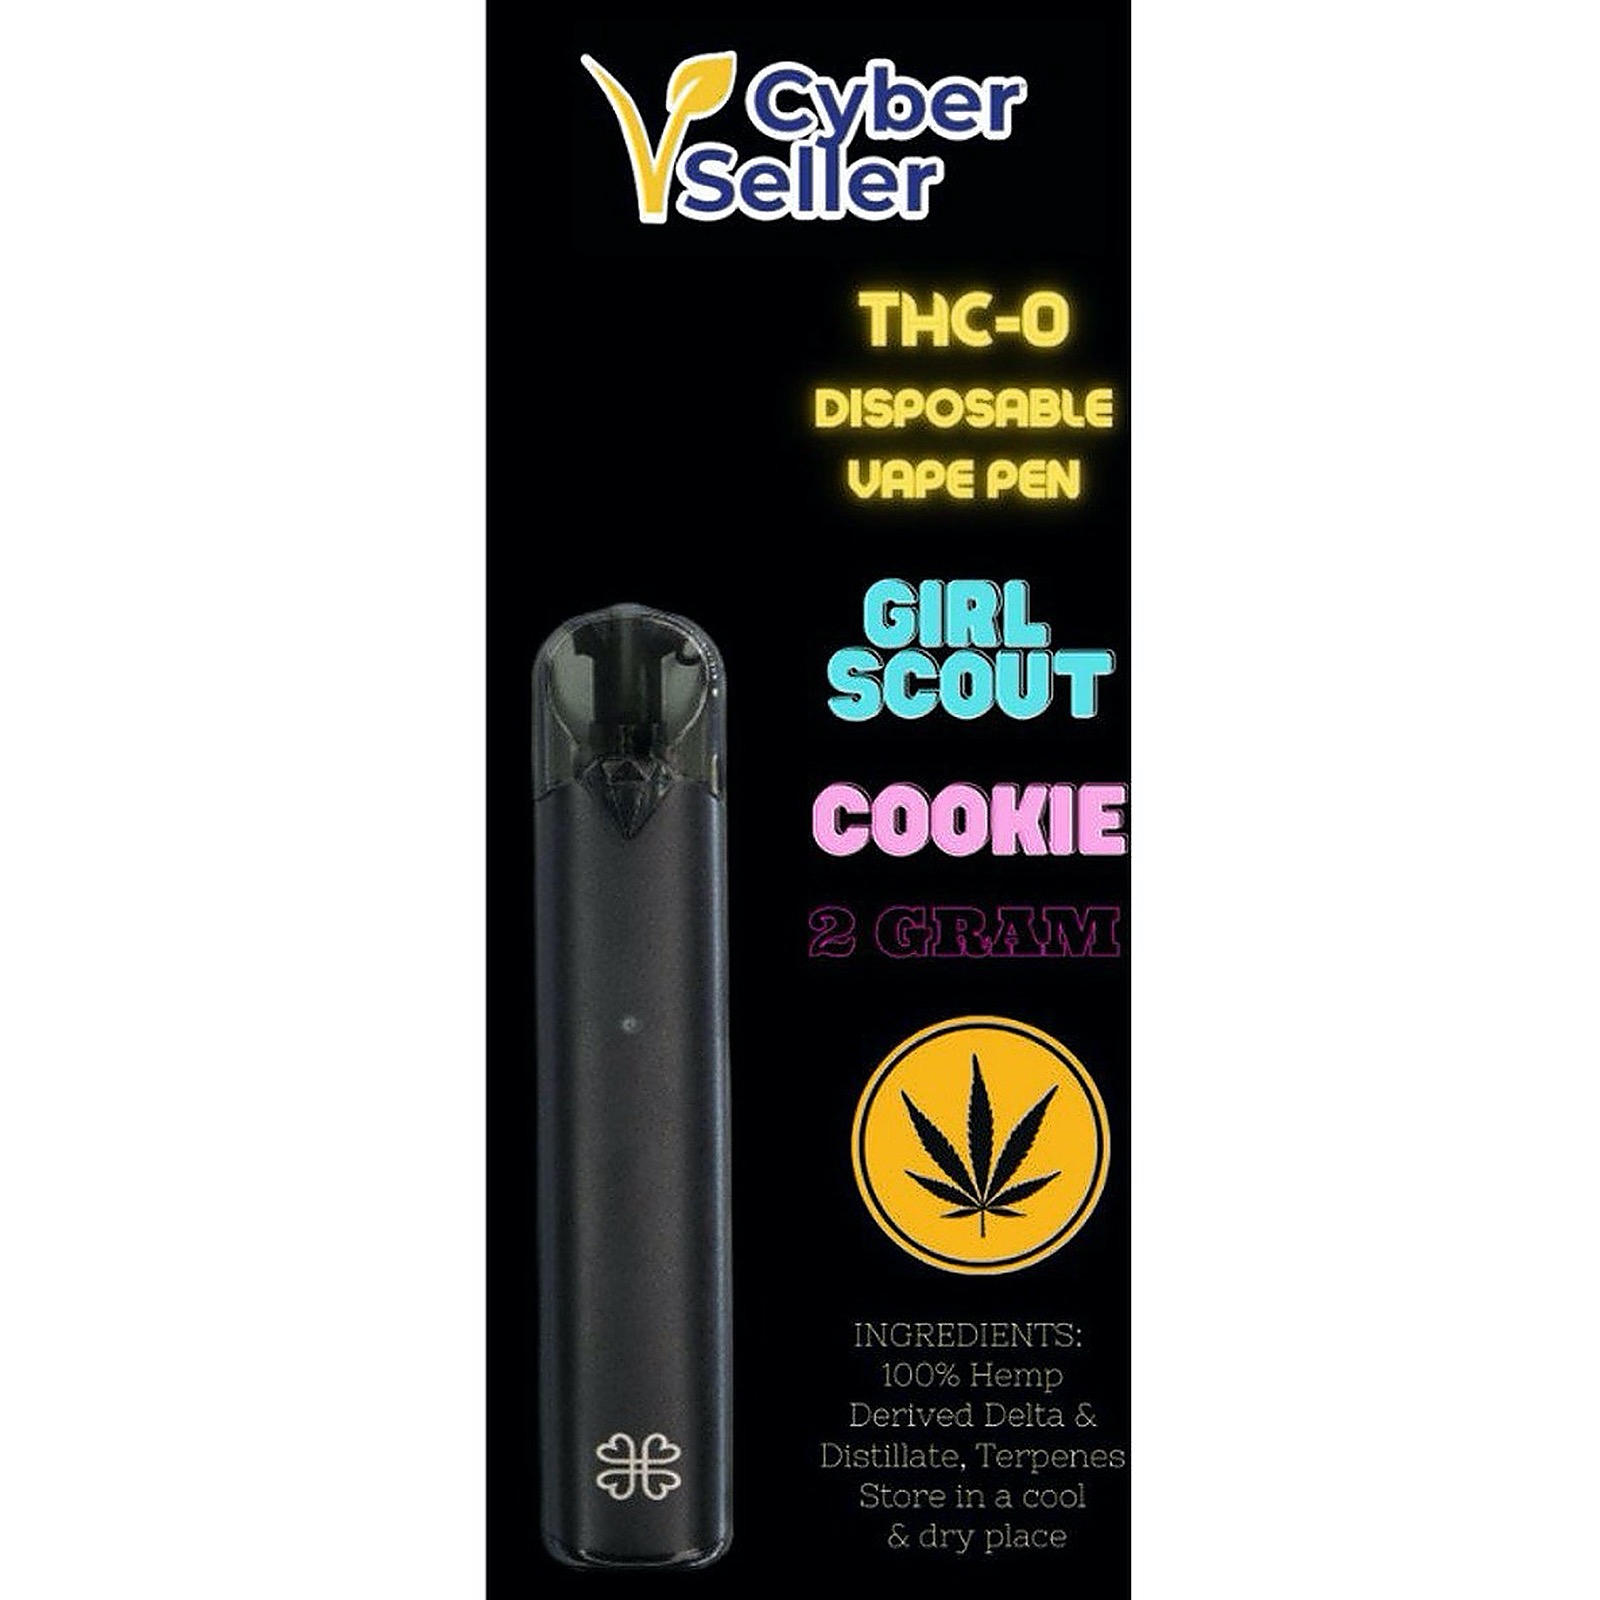 Cyber Seller | Free Shipping | Order Today: THC-0 Vape Pen Girl Scout Cookie  | Leafly